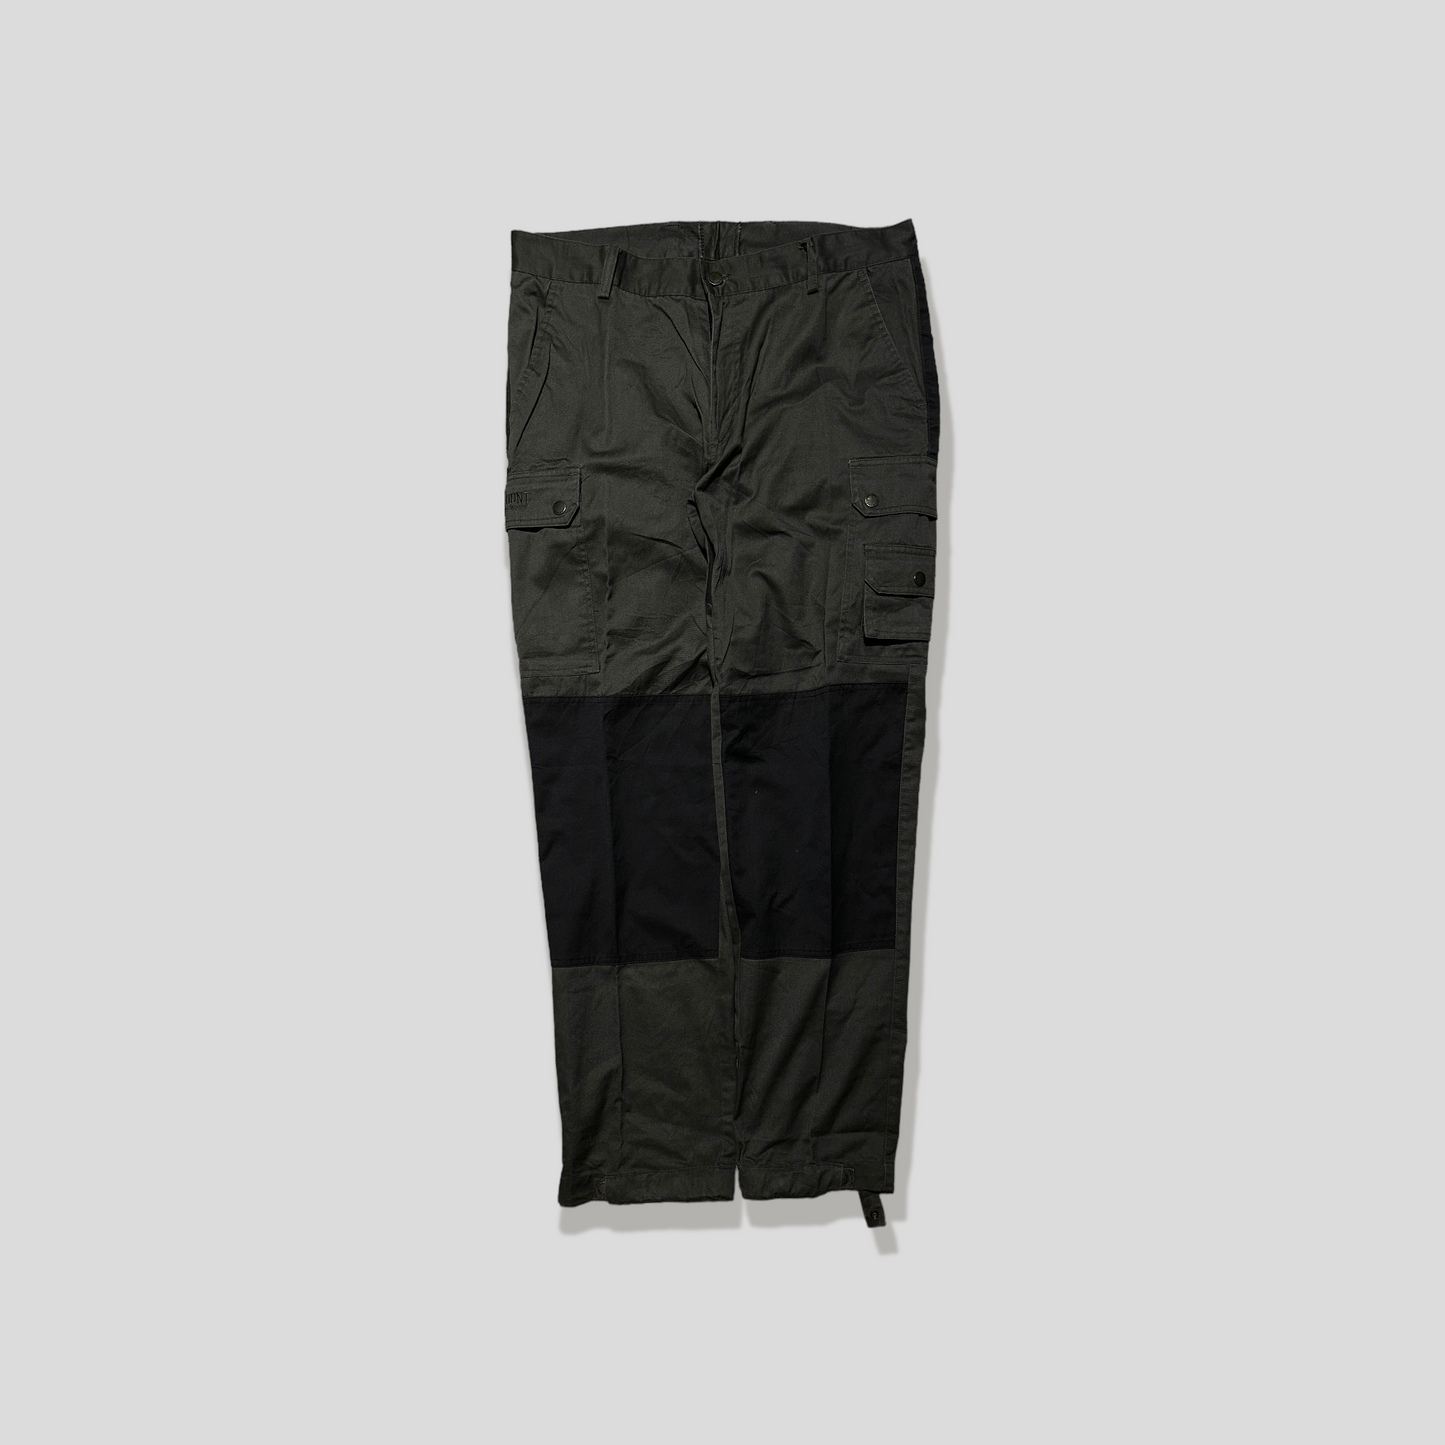 ENGELSONS CARGO PANTS - 34X30